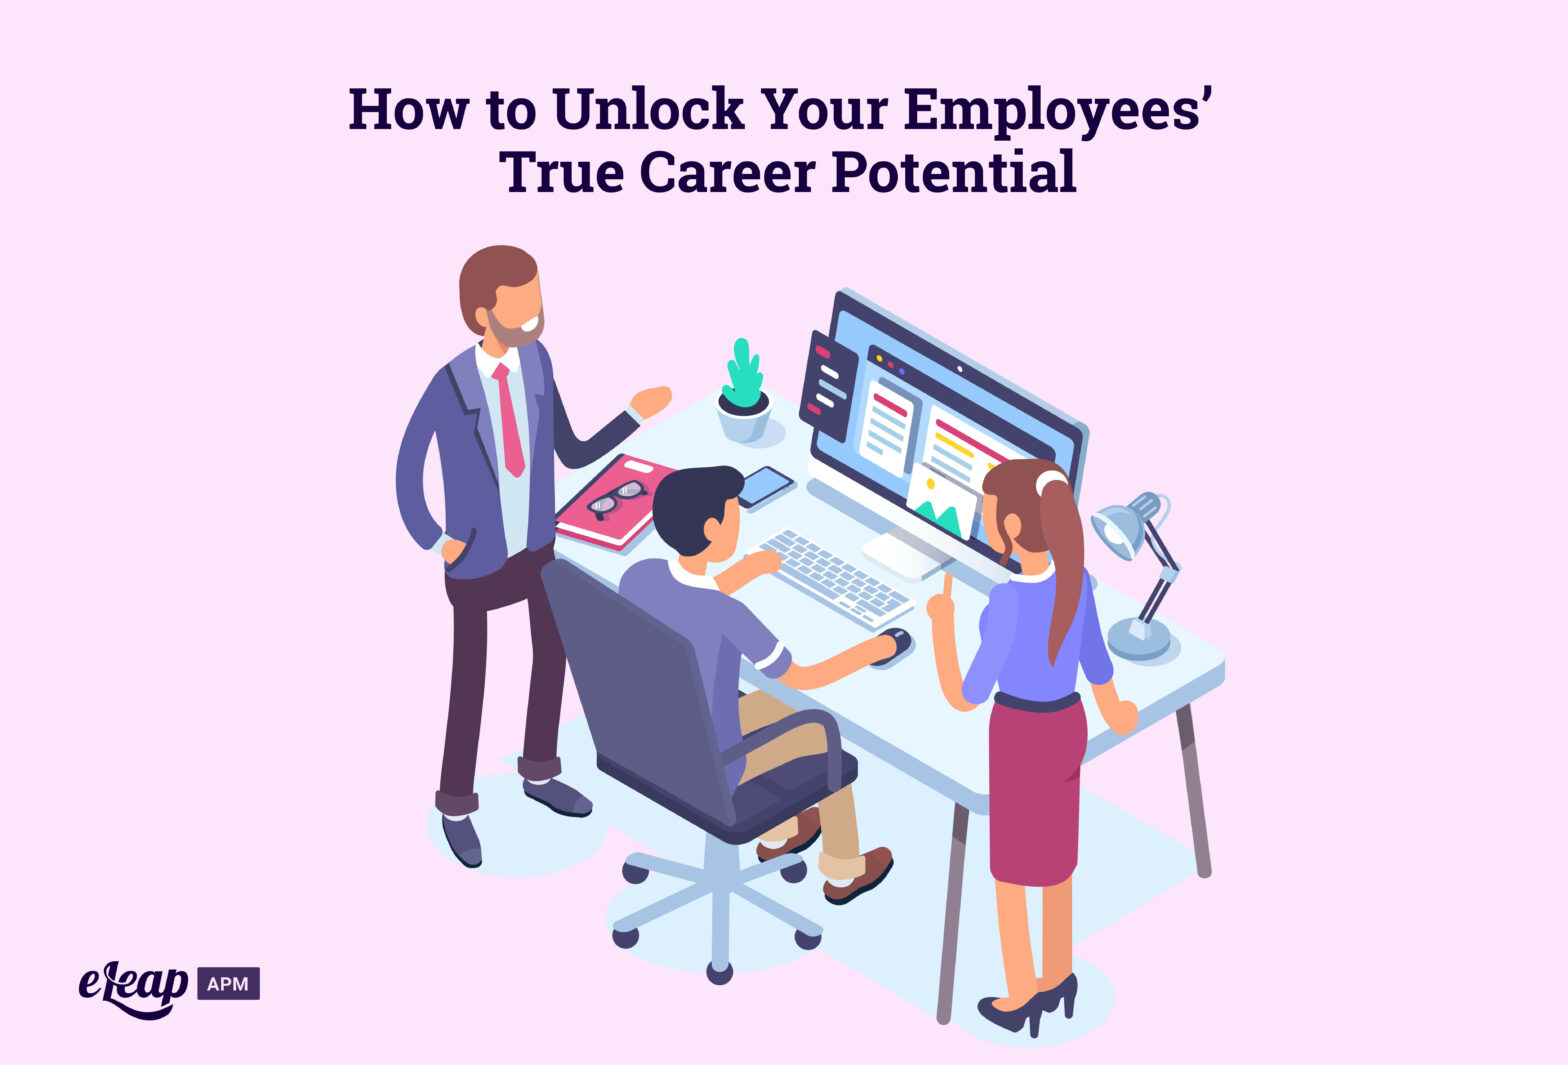 How to Unlock Your Employees’ True Career Potential